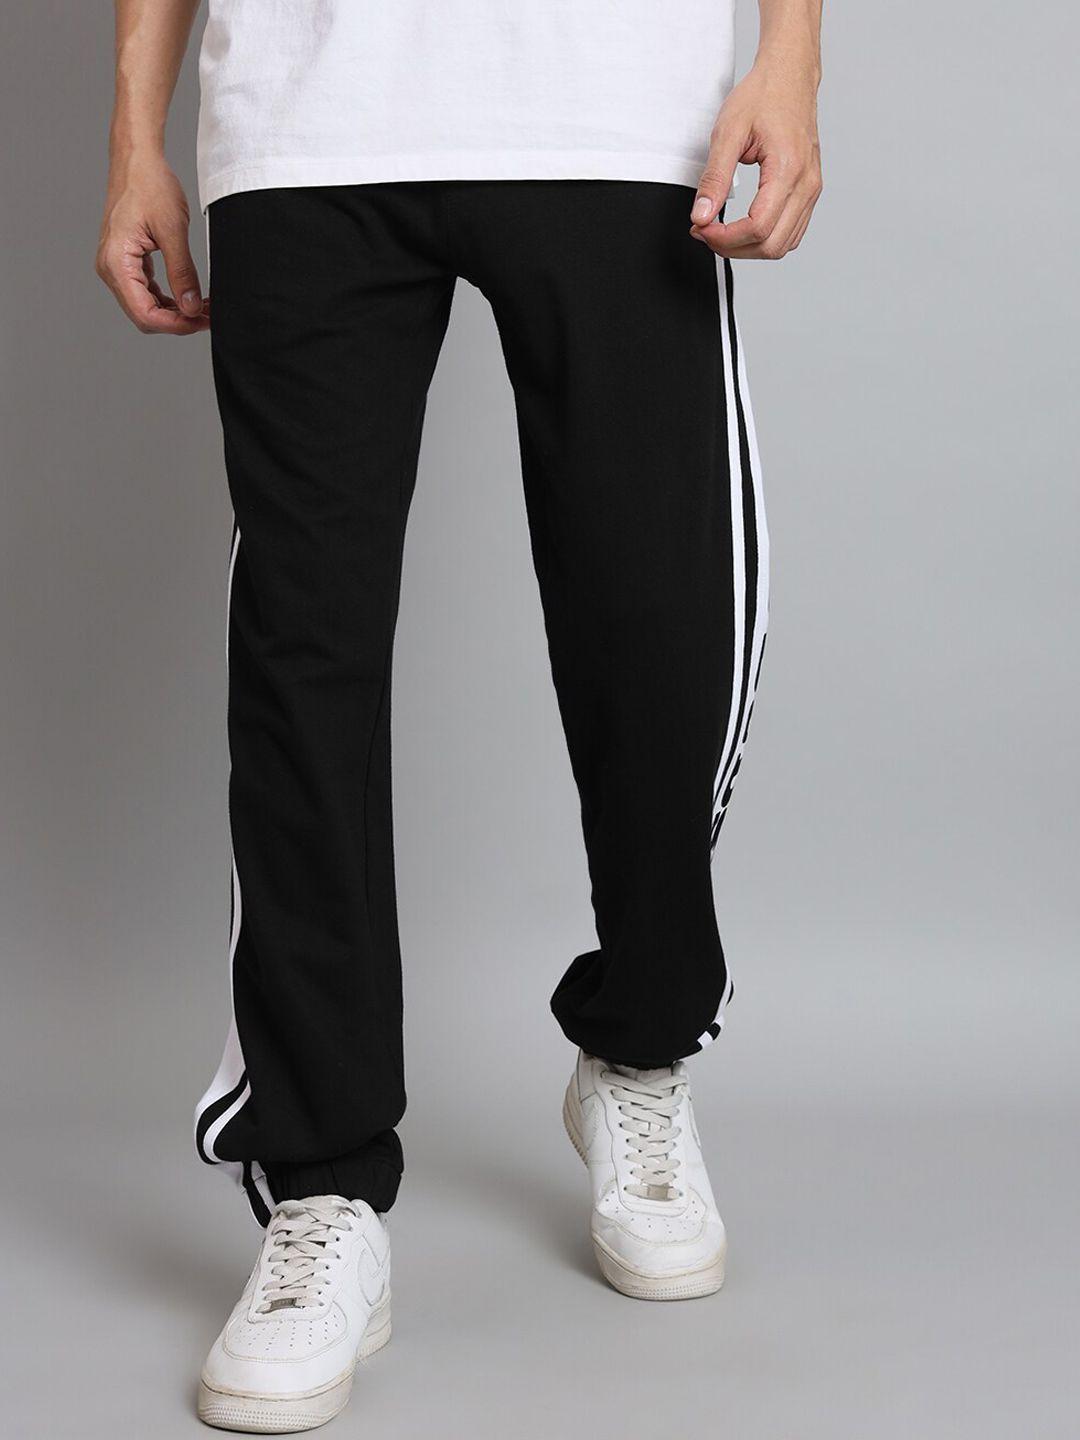 wearduds men brand logo printed pure cotton relaxed fit track pants